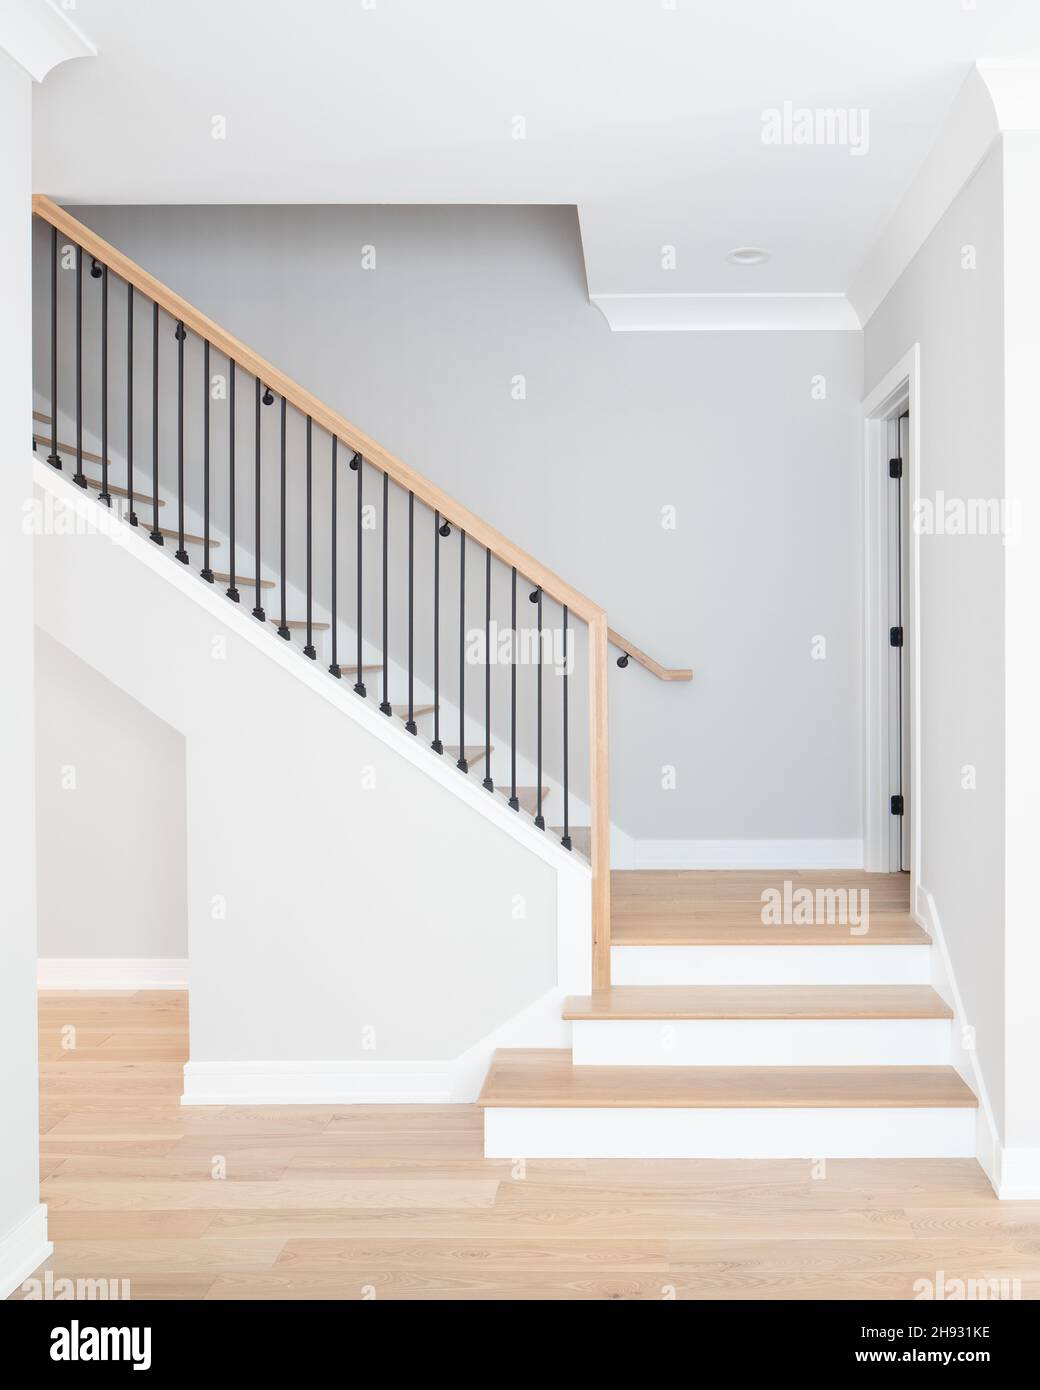 A staircase going up with natural wood steps and handrails, white risers, and wrought iron spindles. Stock Photo